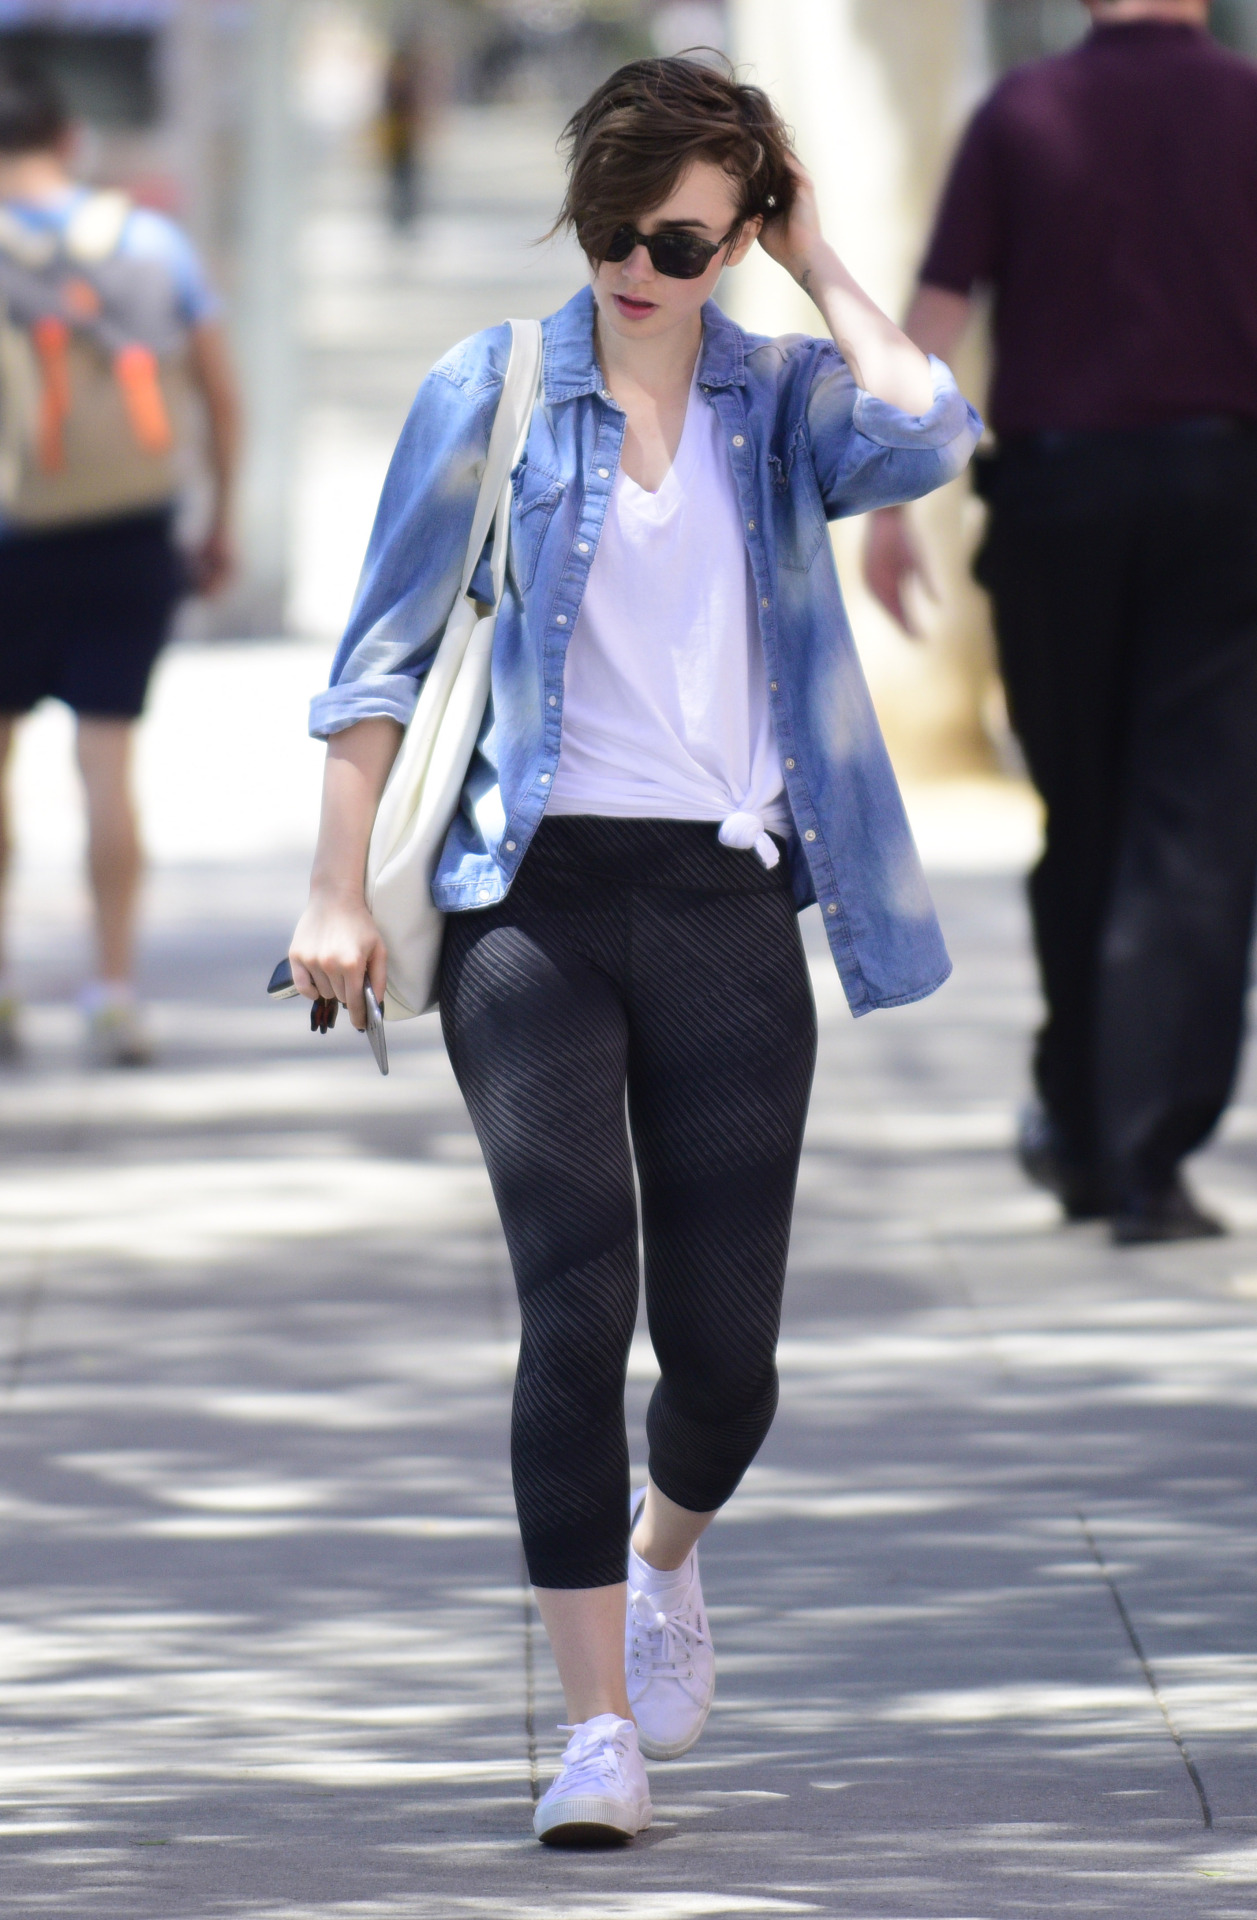 lilycollinsnews: Lily Collins - Leaves Body Pilates in West Hollywood 04/29/2015